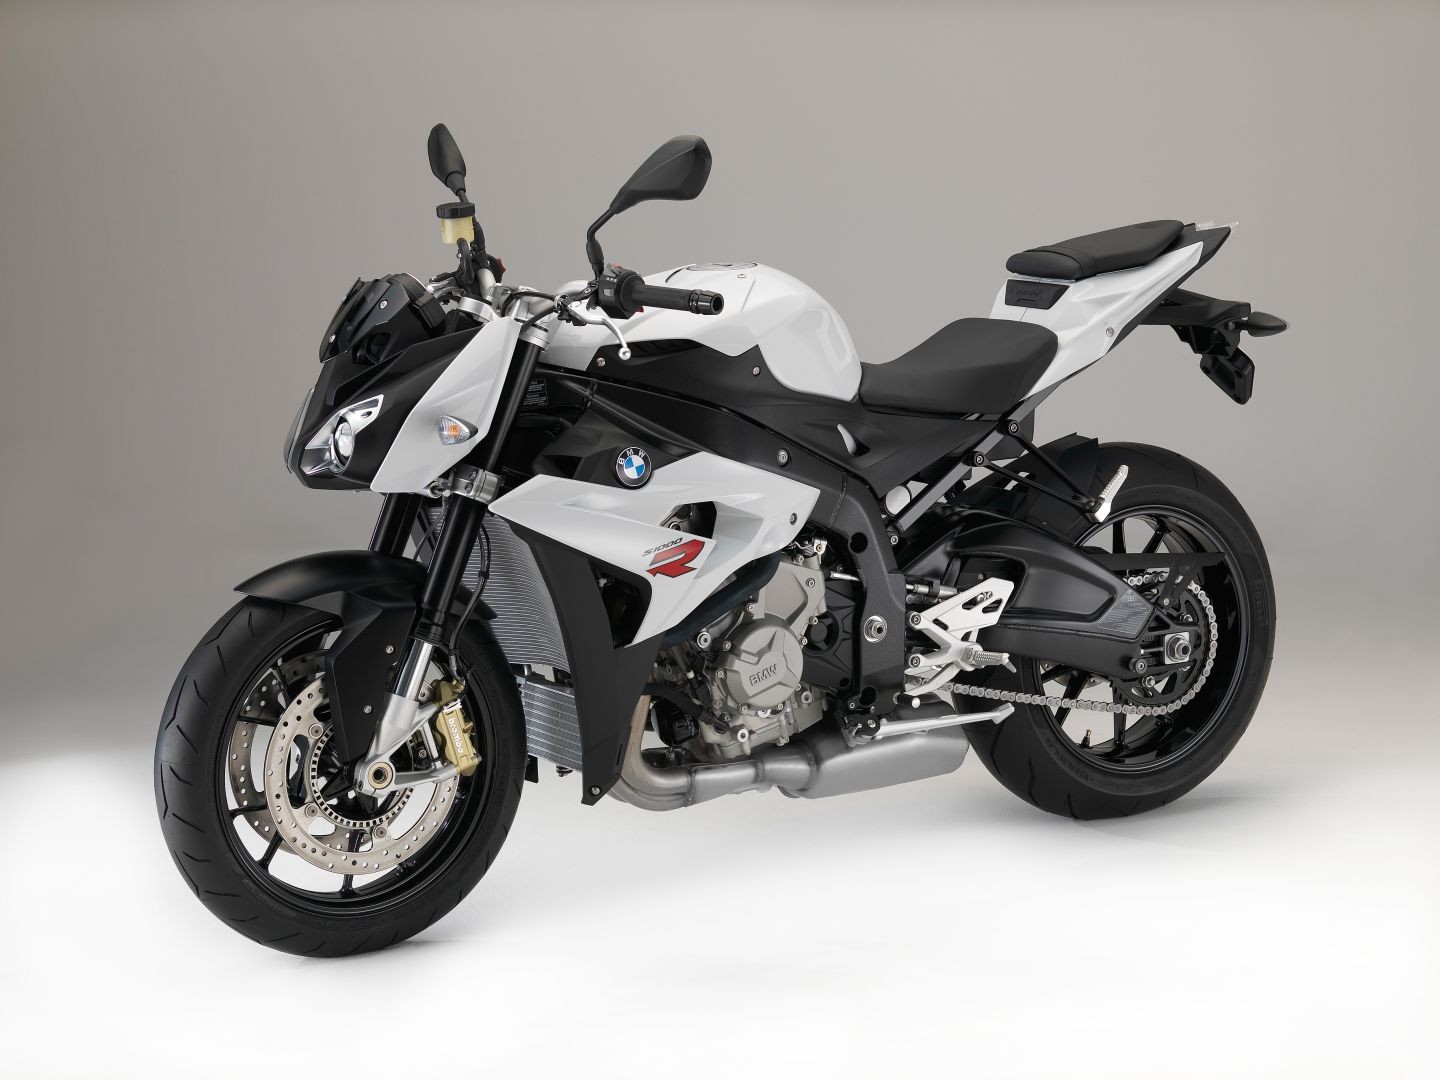 BMW Motorcycles Get Upgraded Colors and New Features for 2016